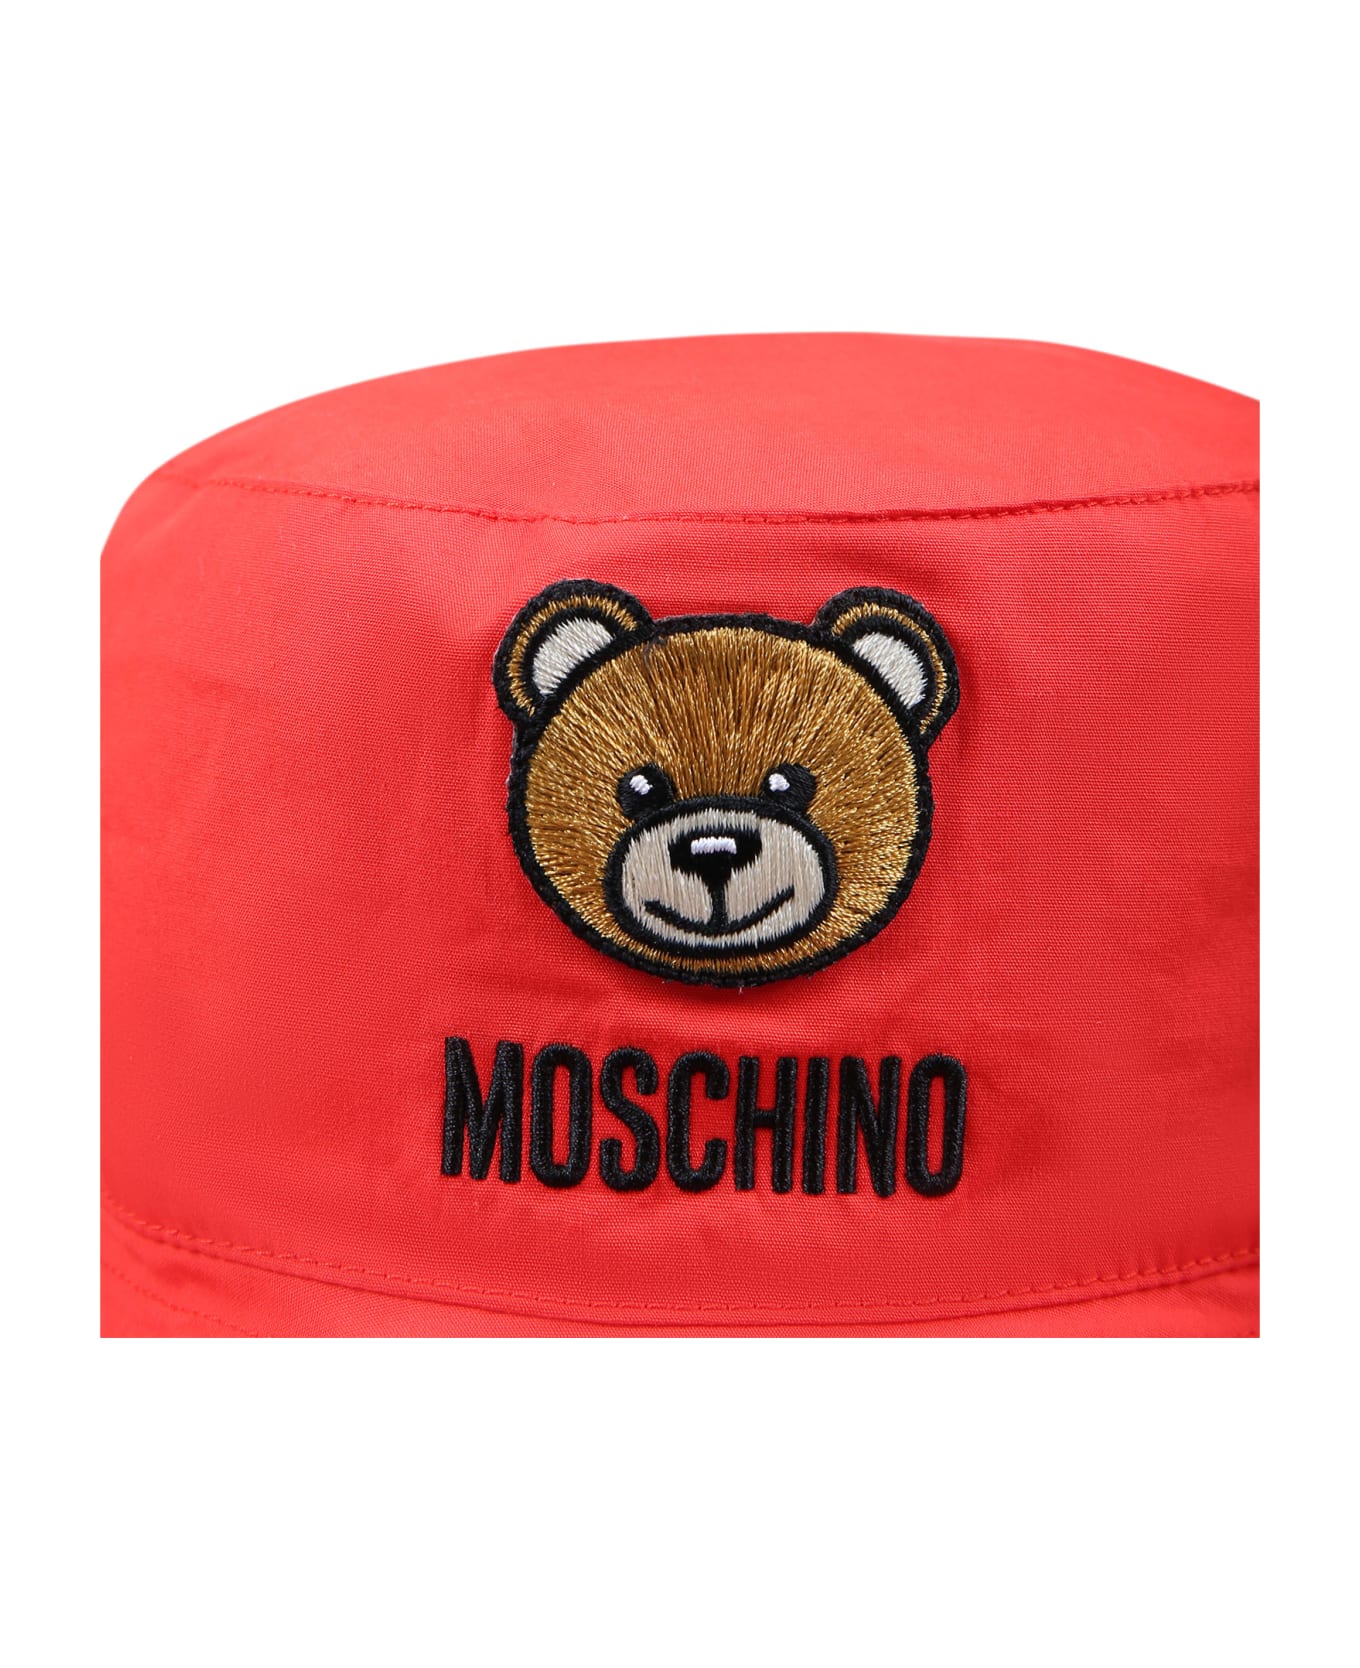 Moschino Red Cloche For Baby Kids With Teddy Bear - Red アクセサリー＆ギフト